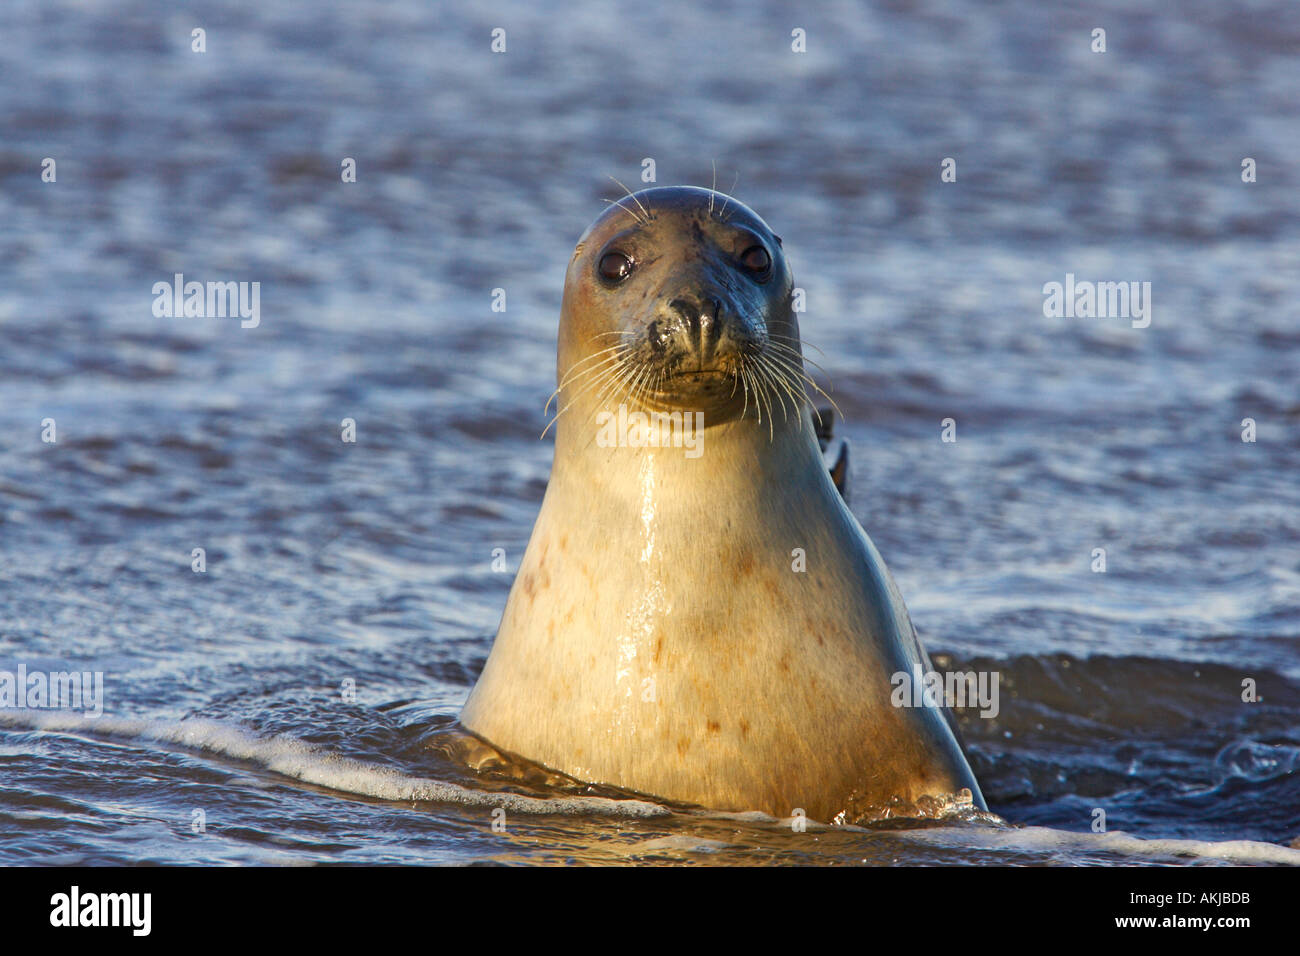 Grey seal Halichoerus grypus with head out of water looking alert donna nook lincolnshire Stock Photo